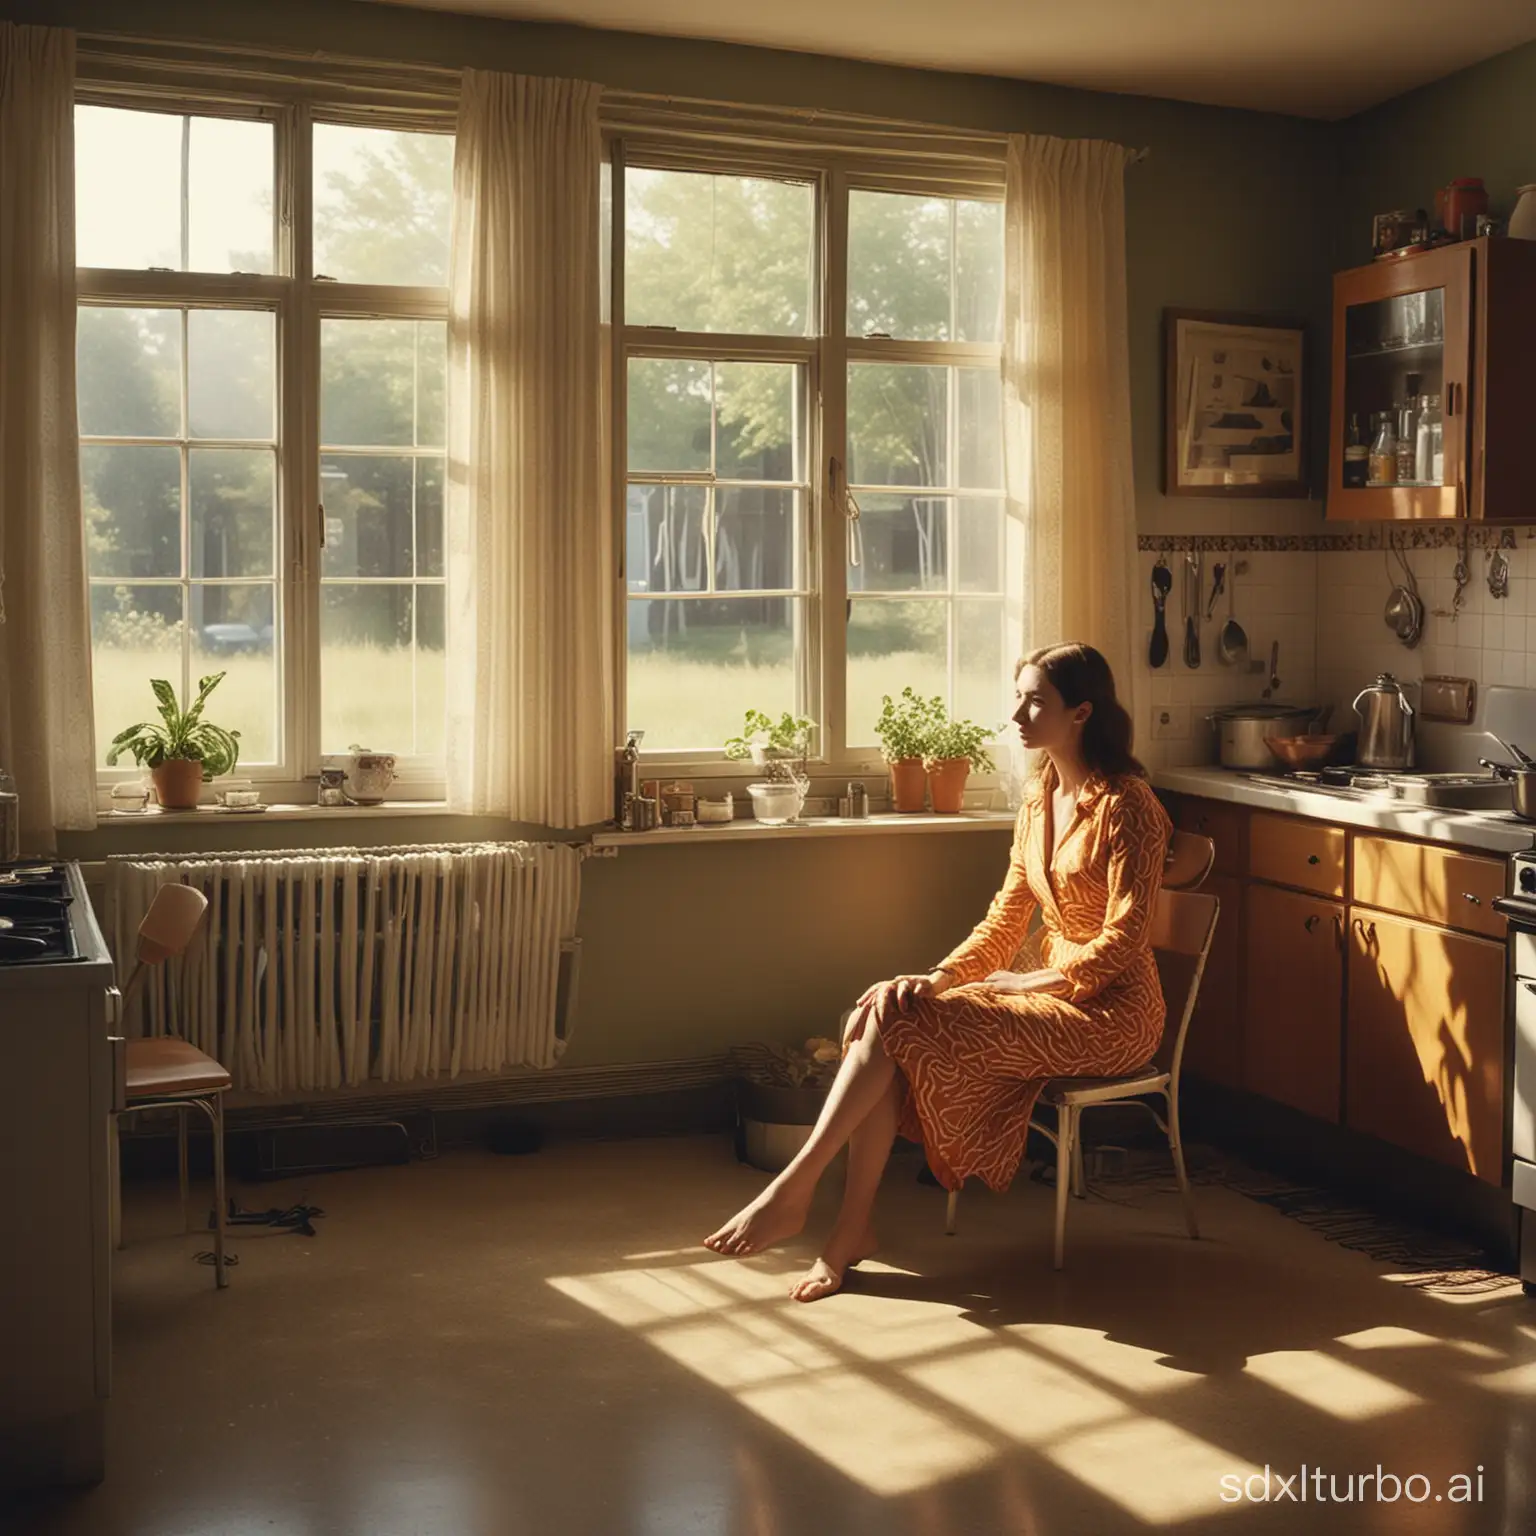 1970s-Style-Kitchen-with-Young-Woman-and-Tame-Zebra-Nostalgic-Scene-Inspired-by-Gregory-Crewdson